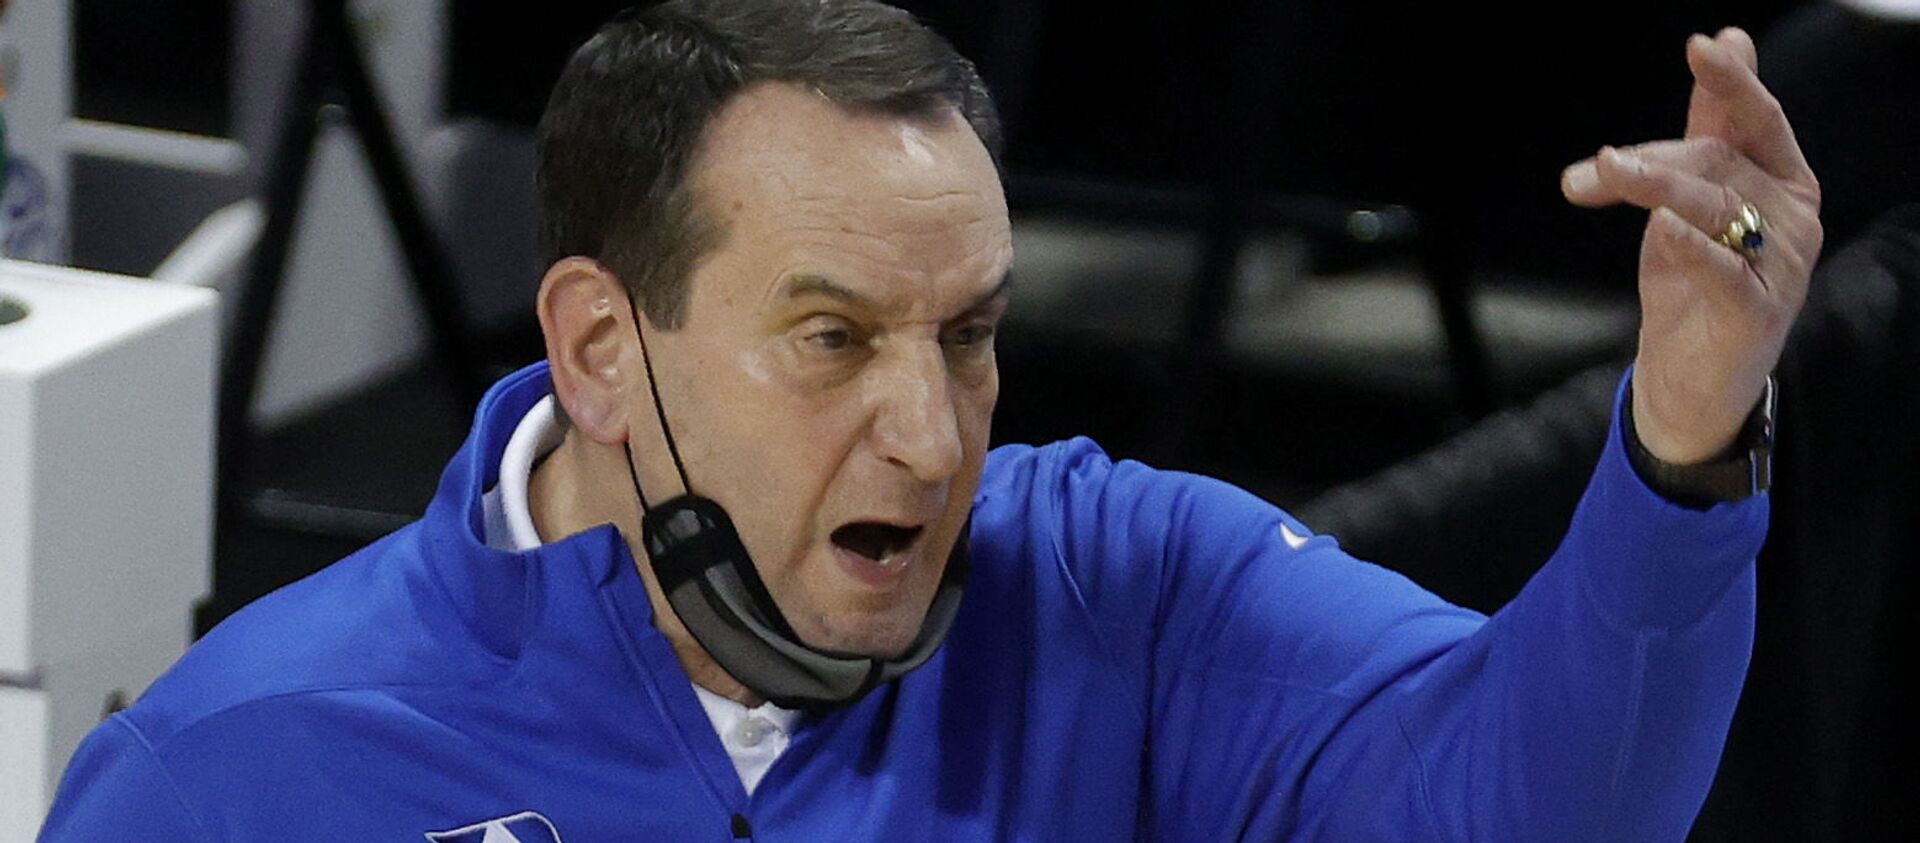 Head coach Mike Krzyzewski of the Duke Blue Devils reacts following a play during the first half of their second round game against the Louisville Cardinals in the ACC Men's Basketball Tournament at Greensboro Coliseum on March 10, 2021 in Greensboro, North Carolina.  - Sputnik International, 1920, 02.06.2021